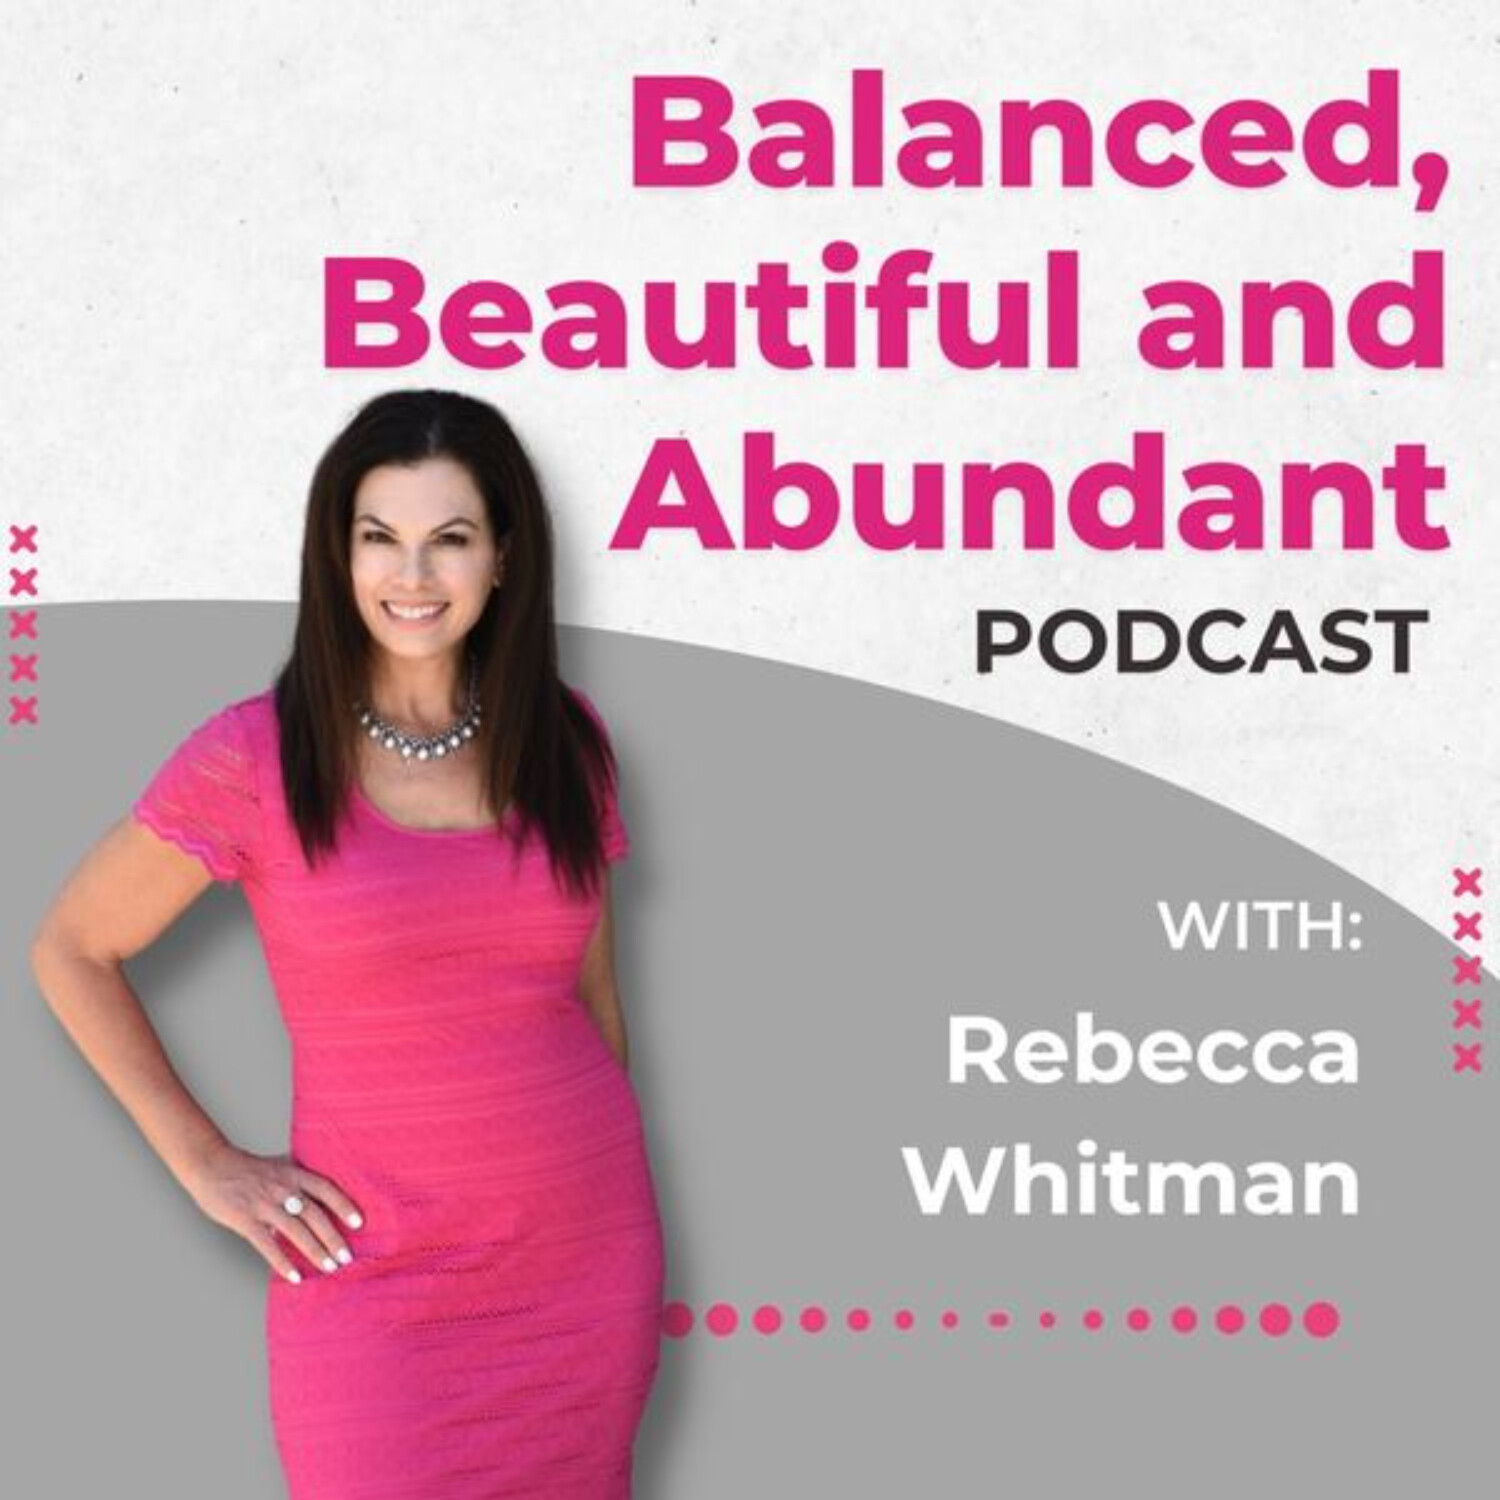 REBECCA WHITMAN PRESENTS: HOW TO ADD ZEROS TO BANK ACCOUNT WITH NICKY BILLOU